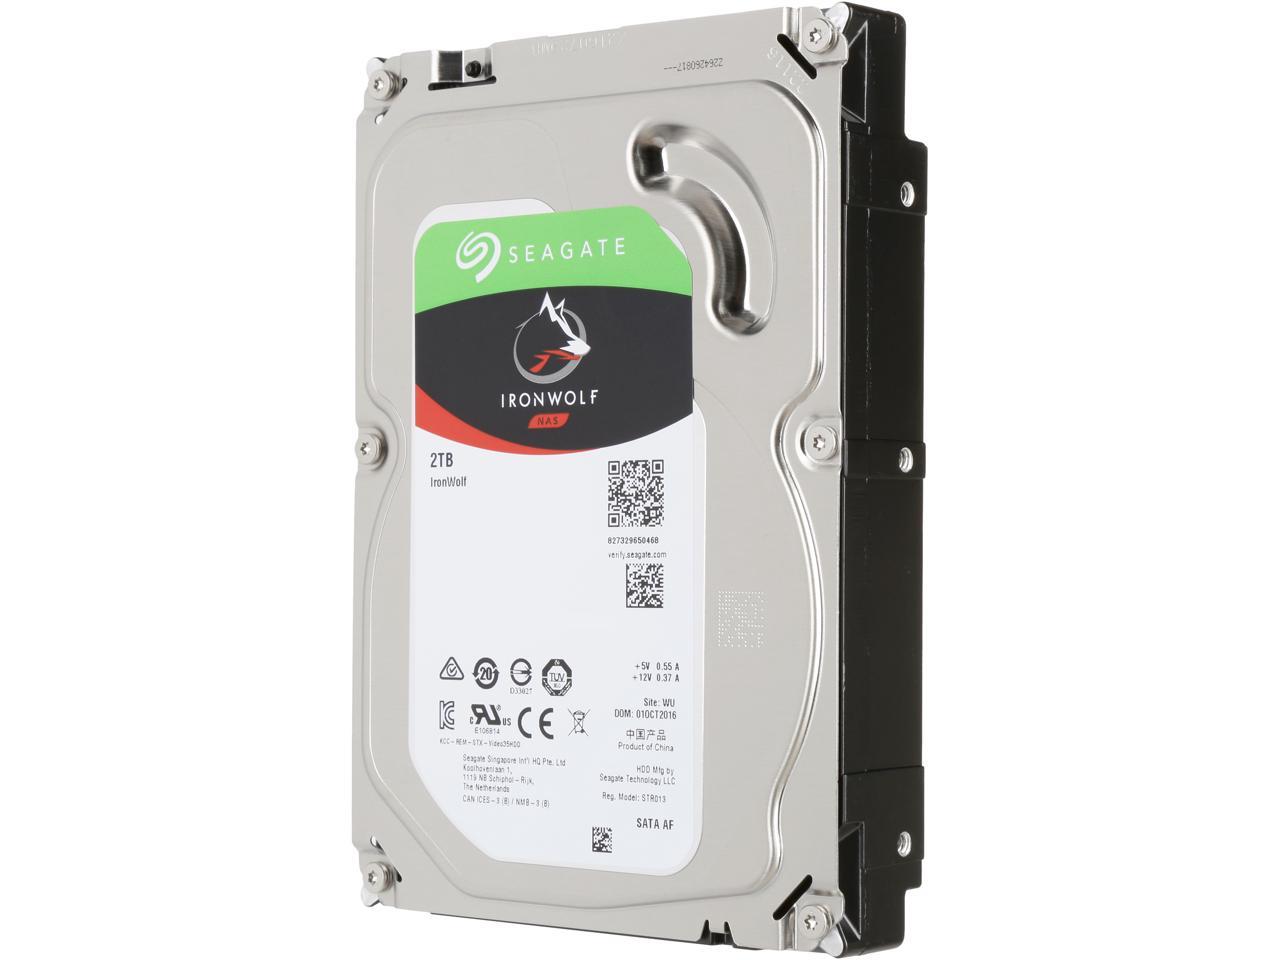 Seagate Ironwolf 2Tb Nas Hard Drive 5900 Rpm 64Mb Cache Sata 6.0Gb/S Cmr 3.5" Internal Hdd For Raid Network Attached Storage St2000Vn004